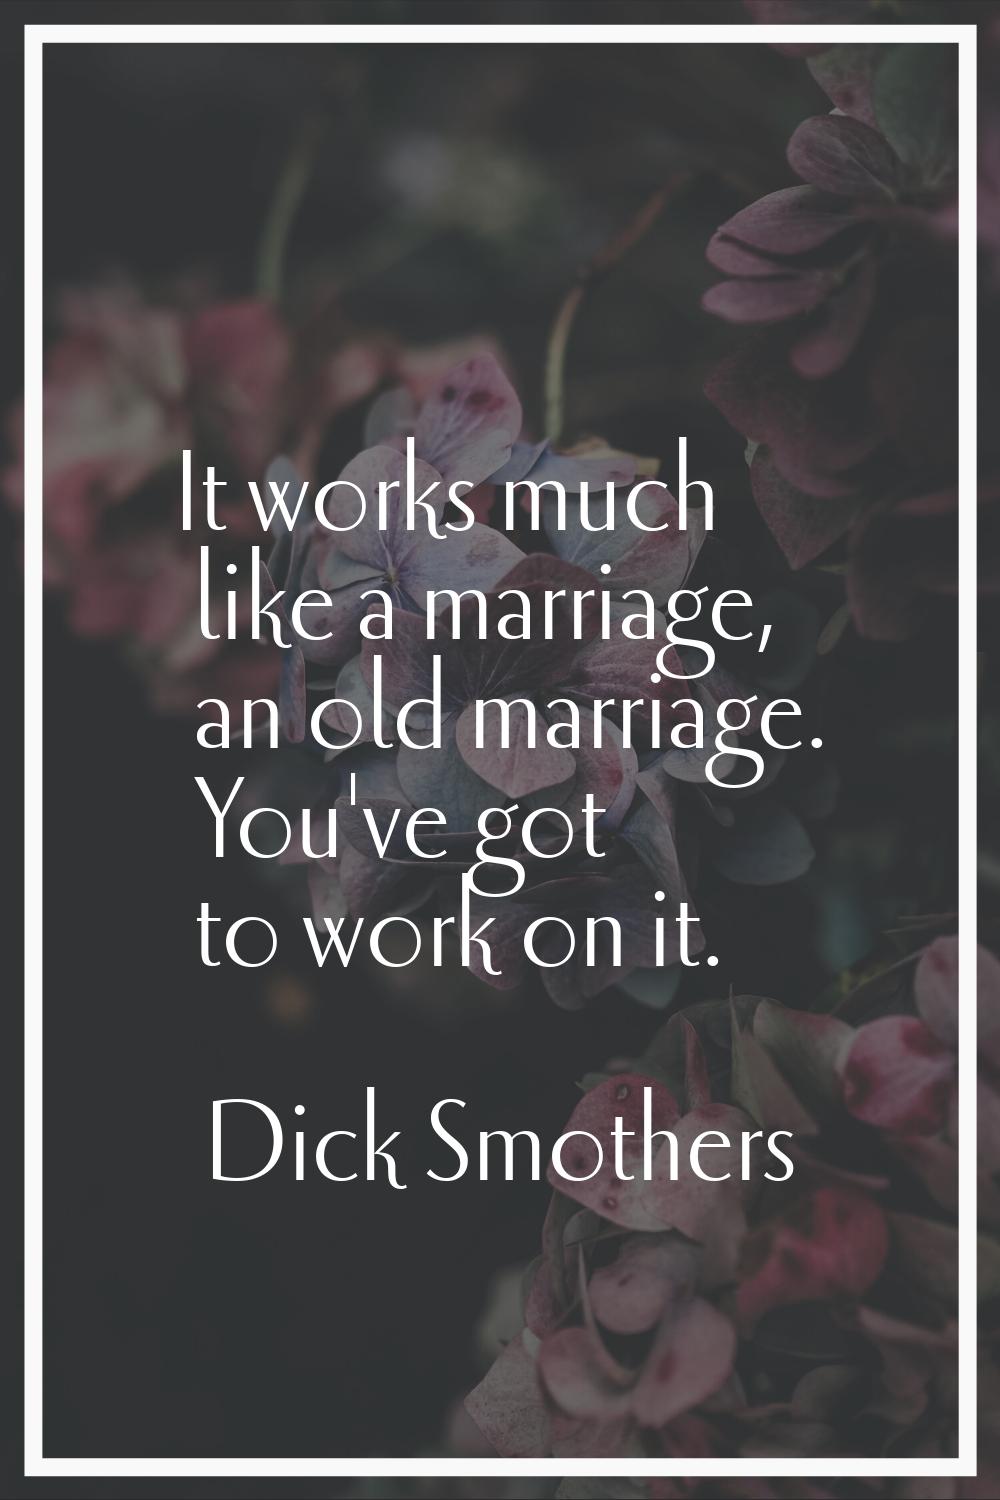 It works much like a marriage, an old marriage. You've got to work on it.